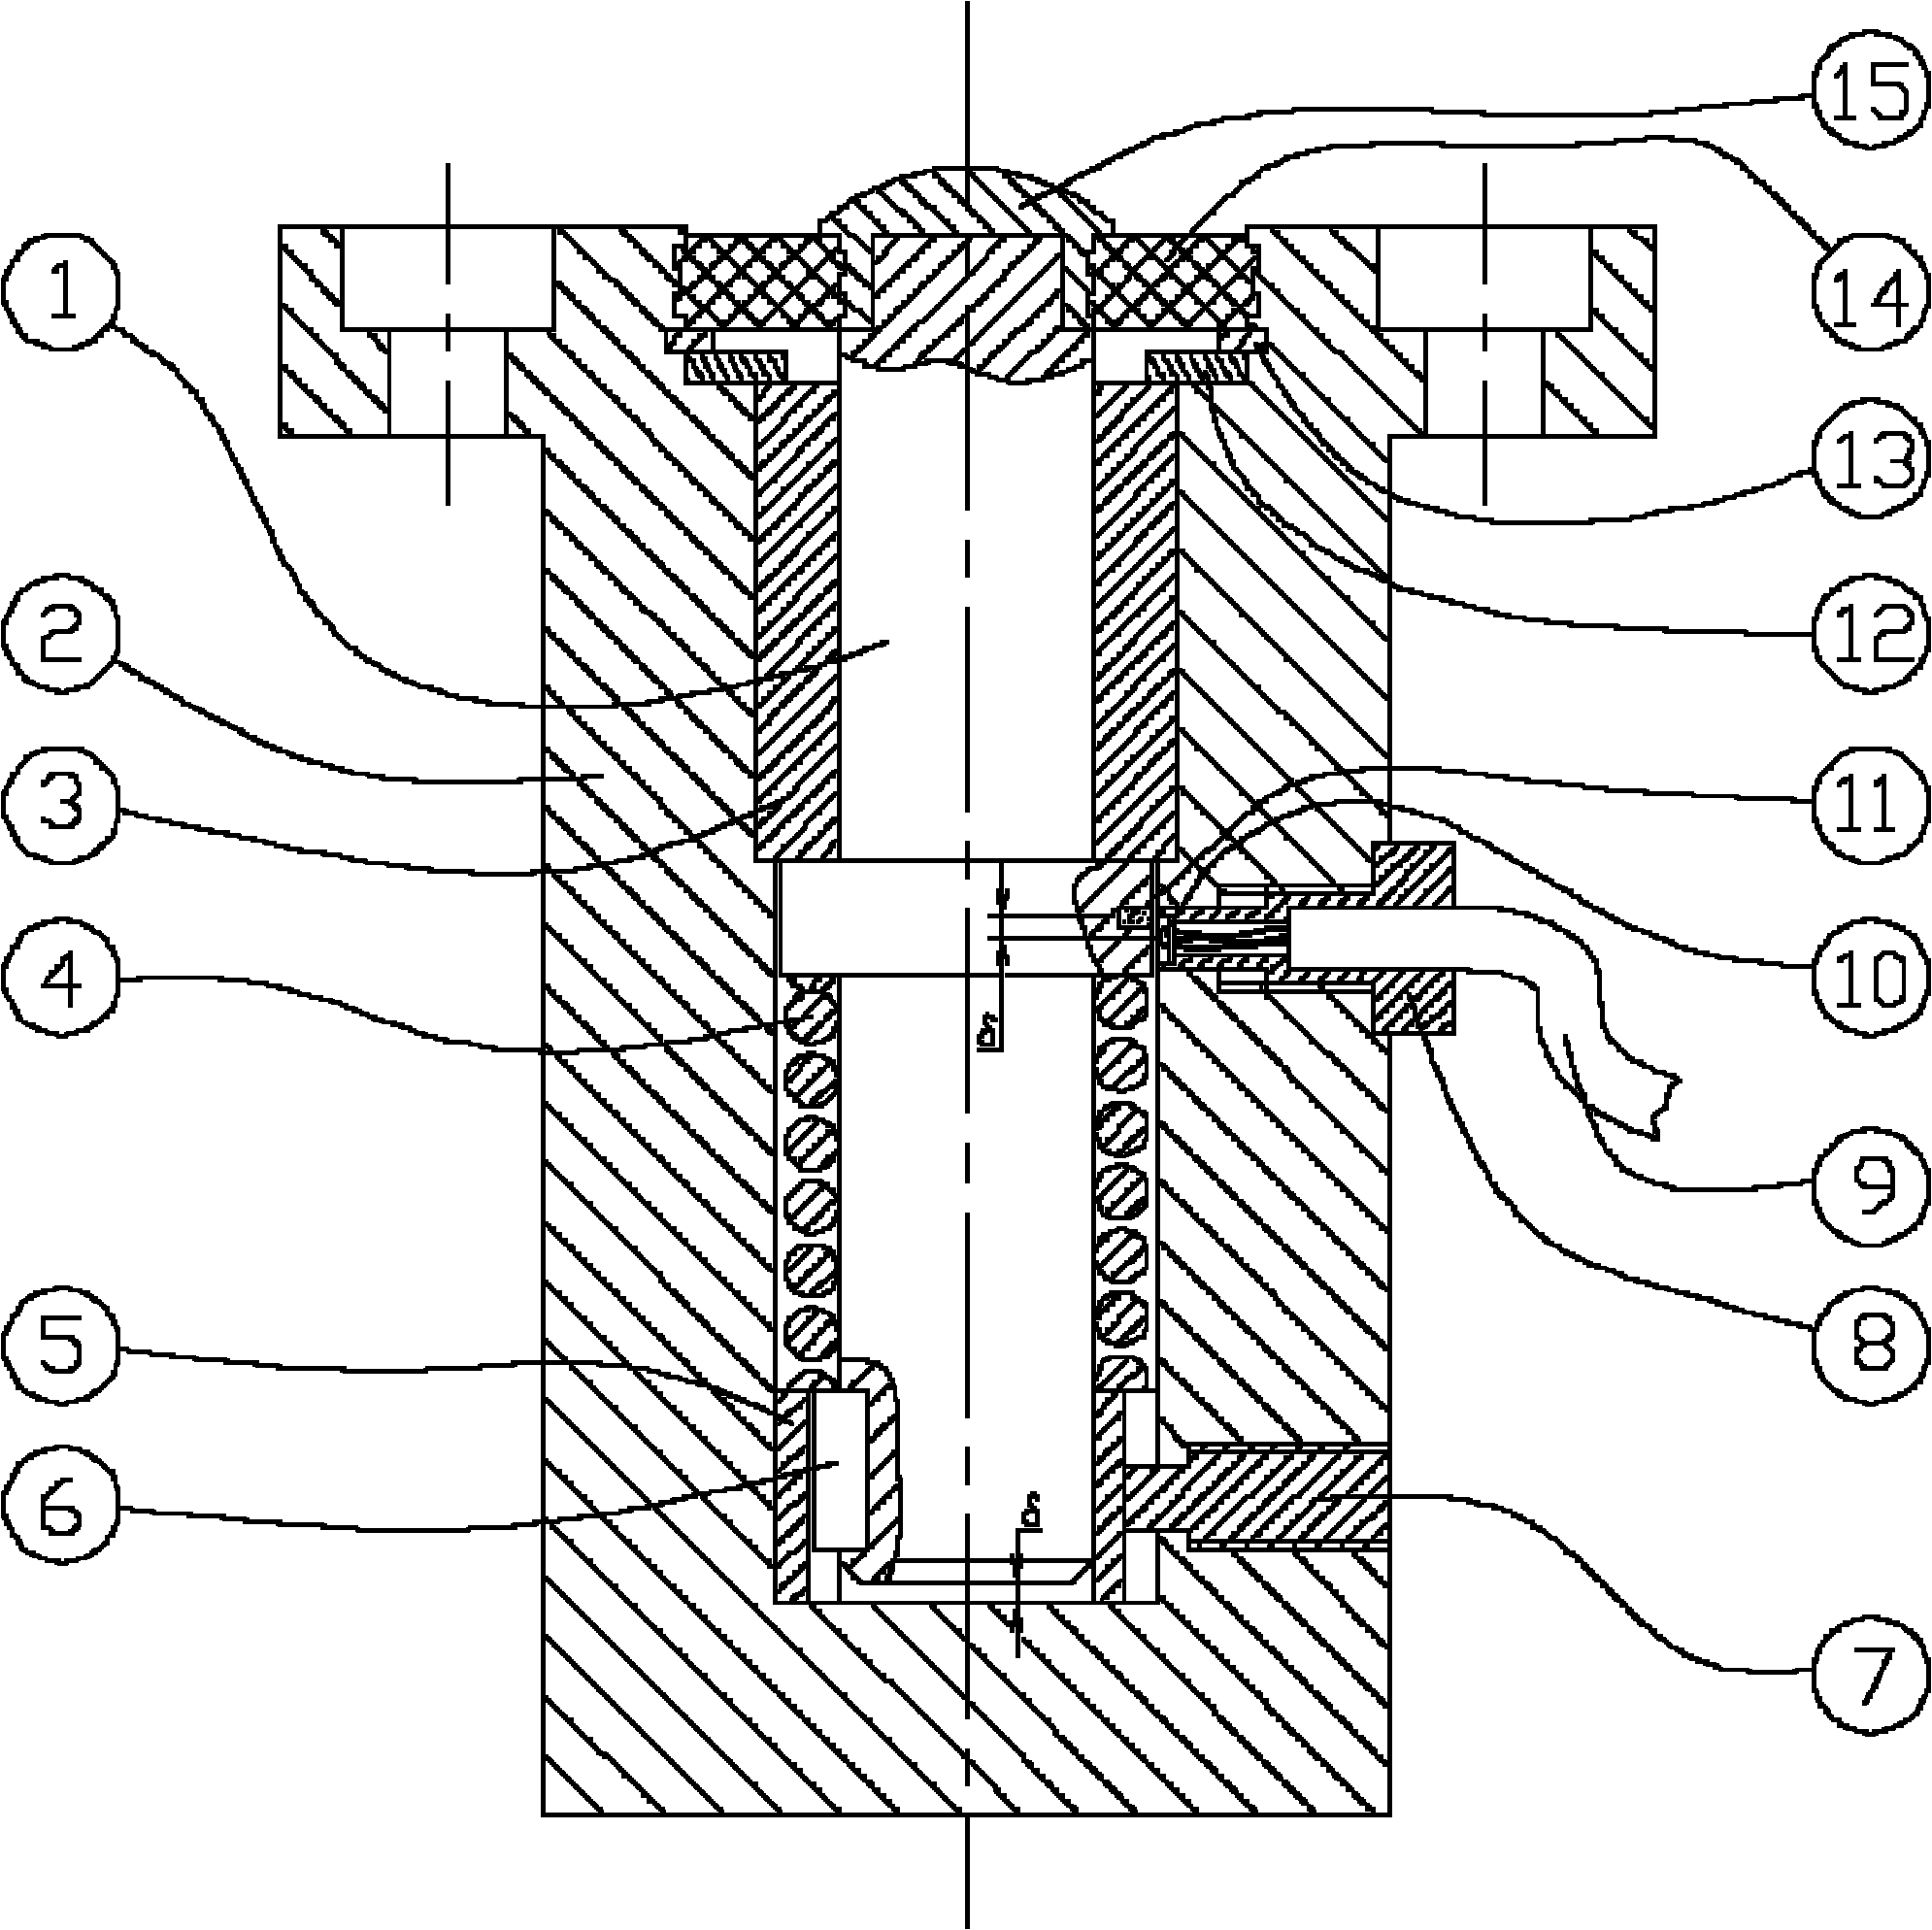 Truck scale sensor for detecting quantity of automobile tires